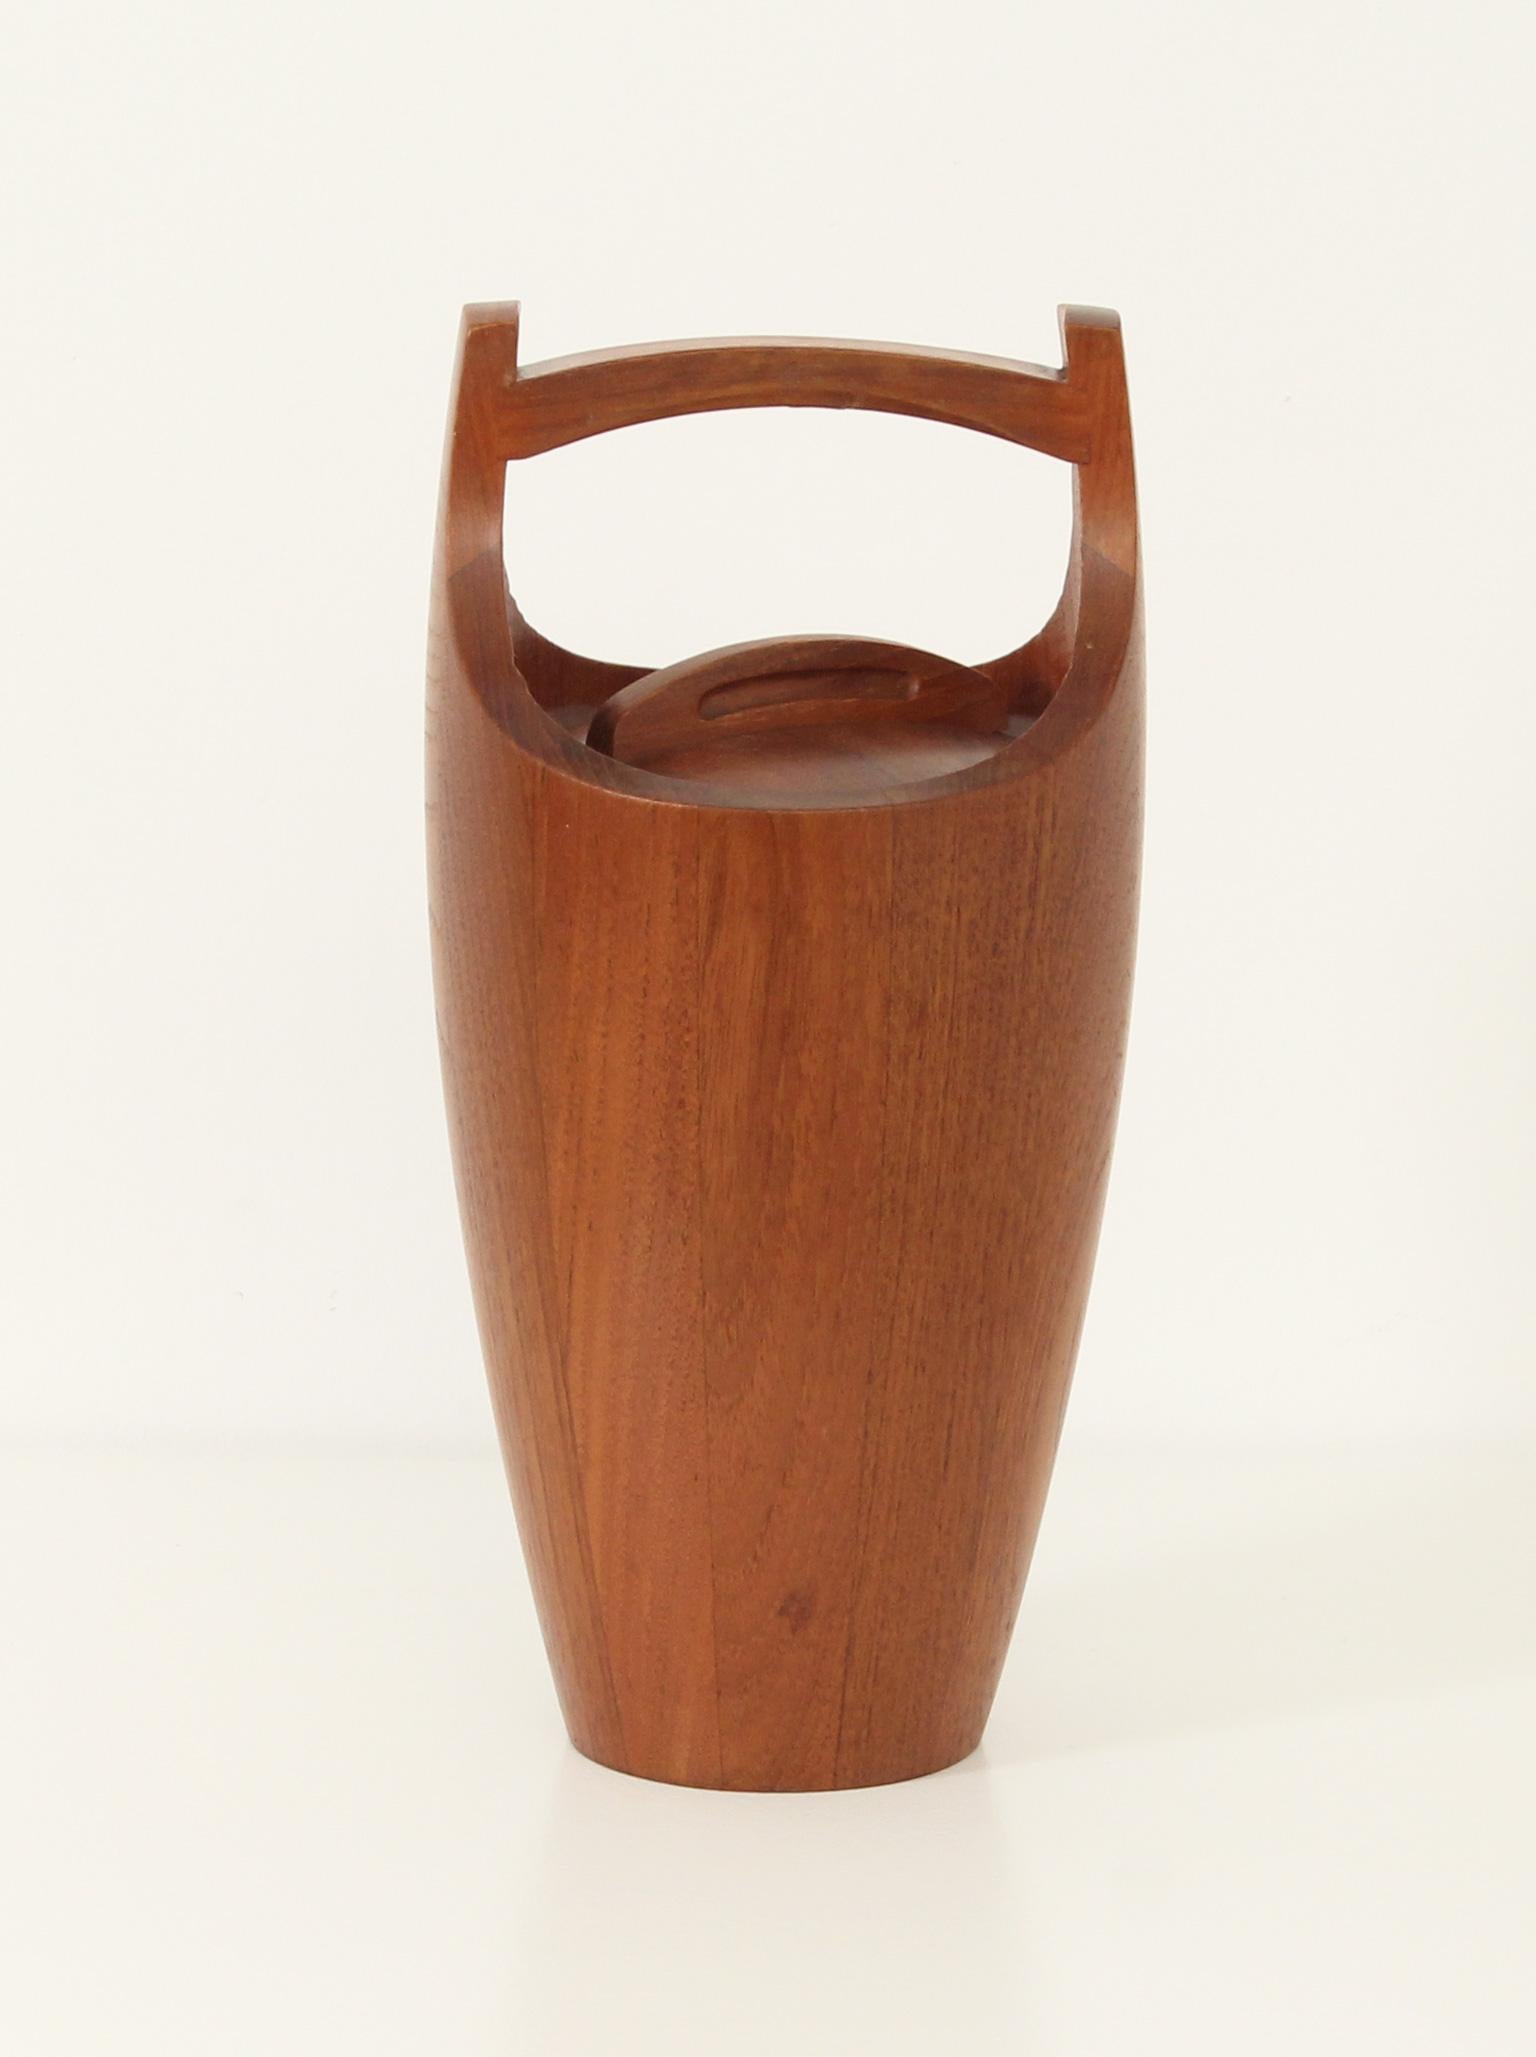 Congo ice bucket designed by Jens Harald Quistgaard for Dansk Designs, Denmark, 1960's. Teak wood and orange plastic interior for the ice cubes. A classic of Scandinavian design.